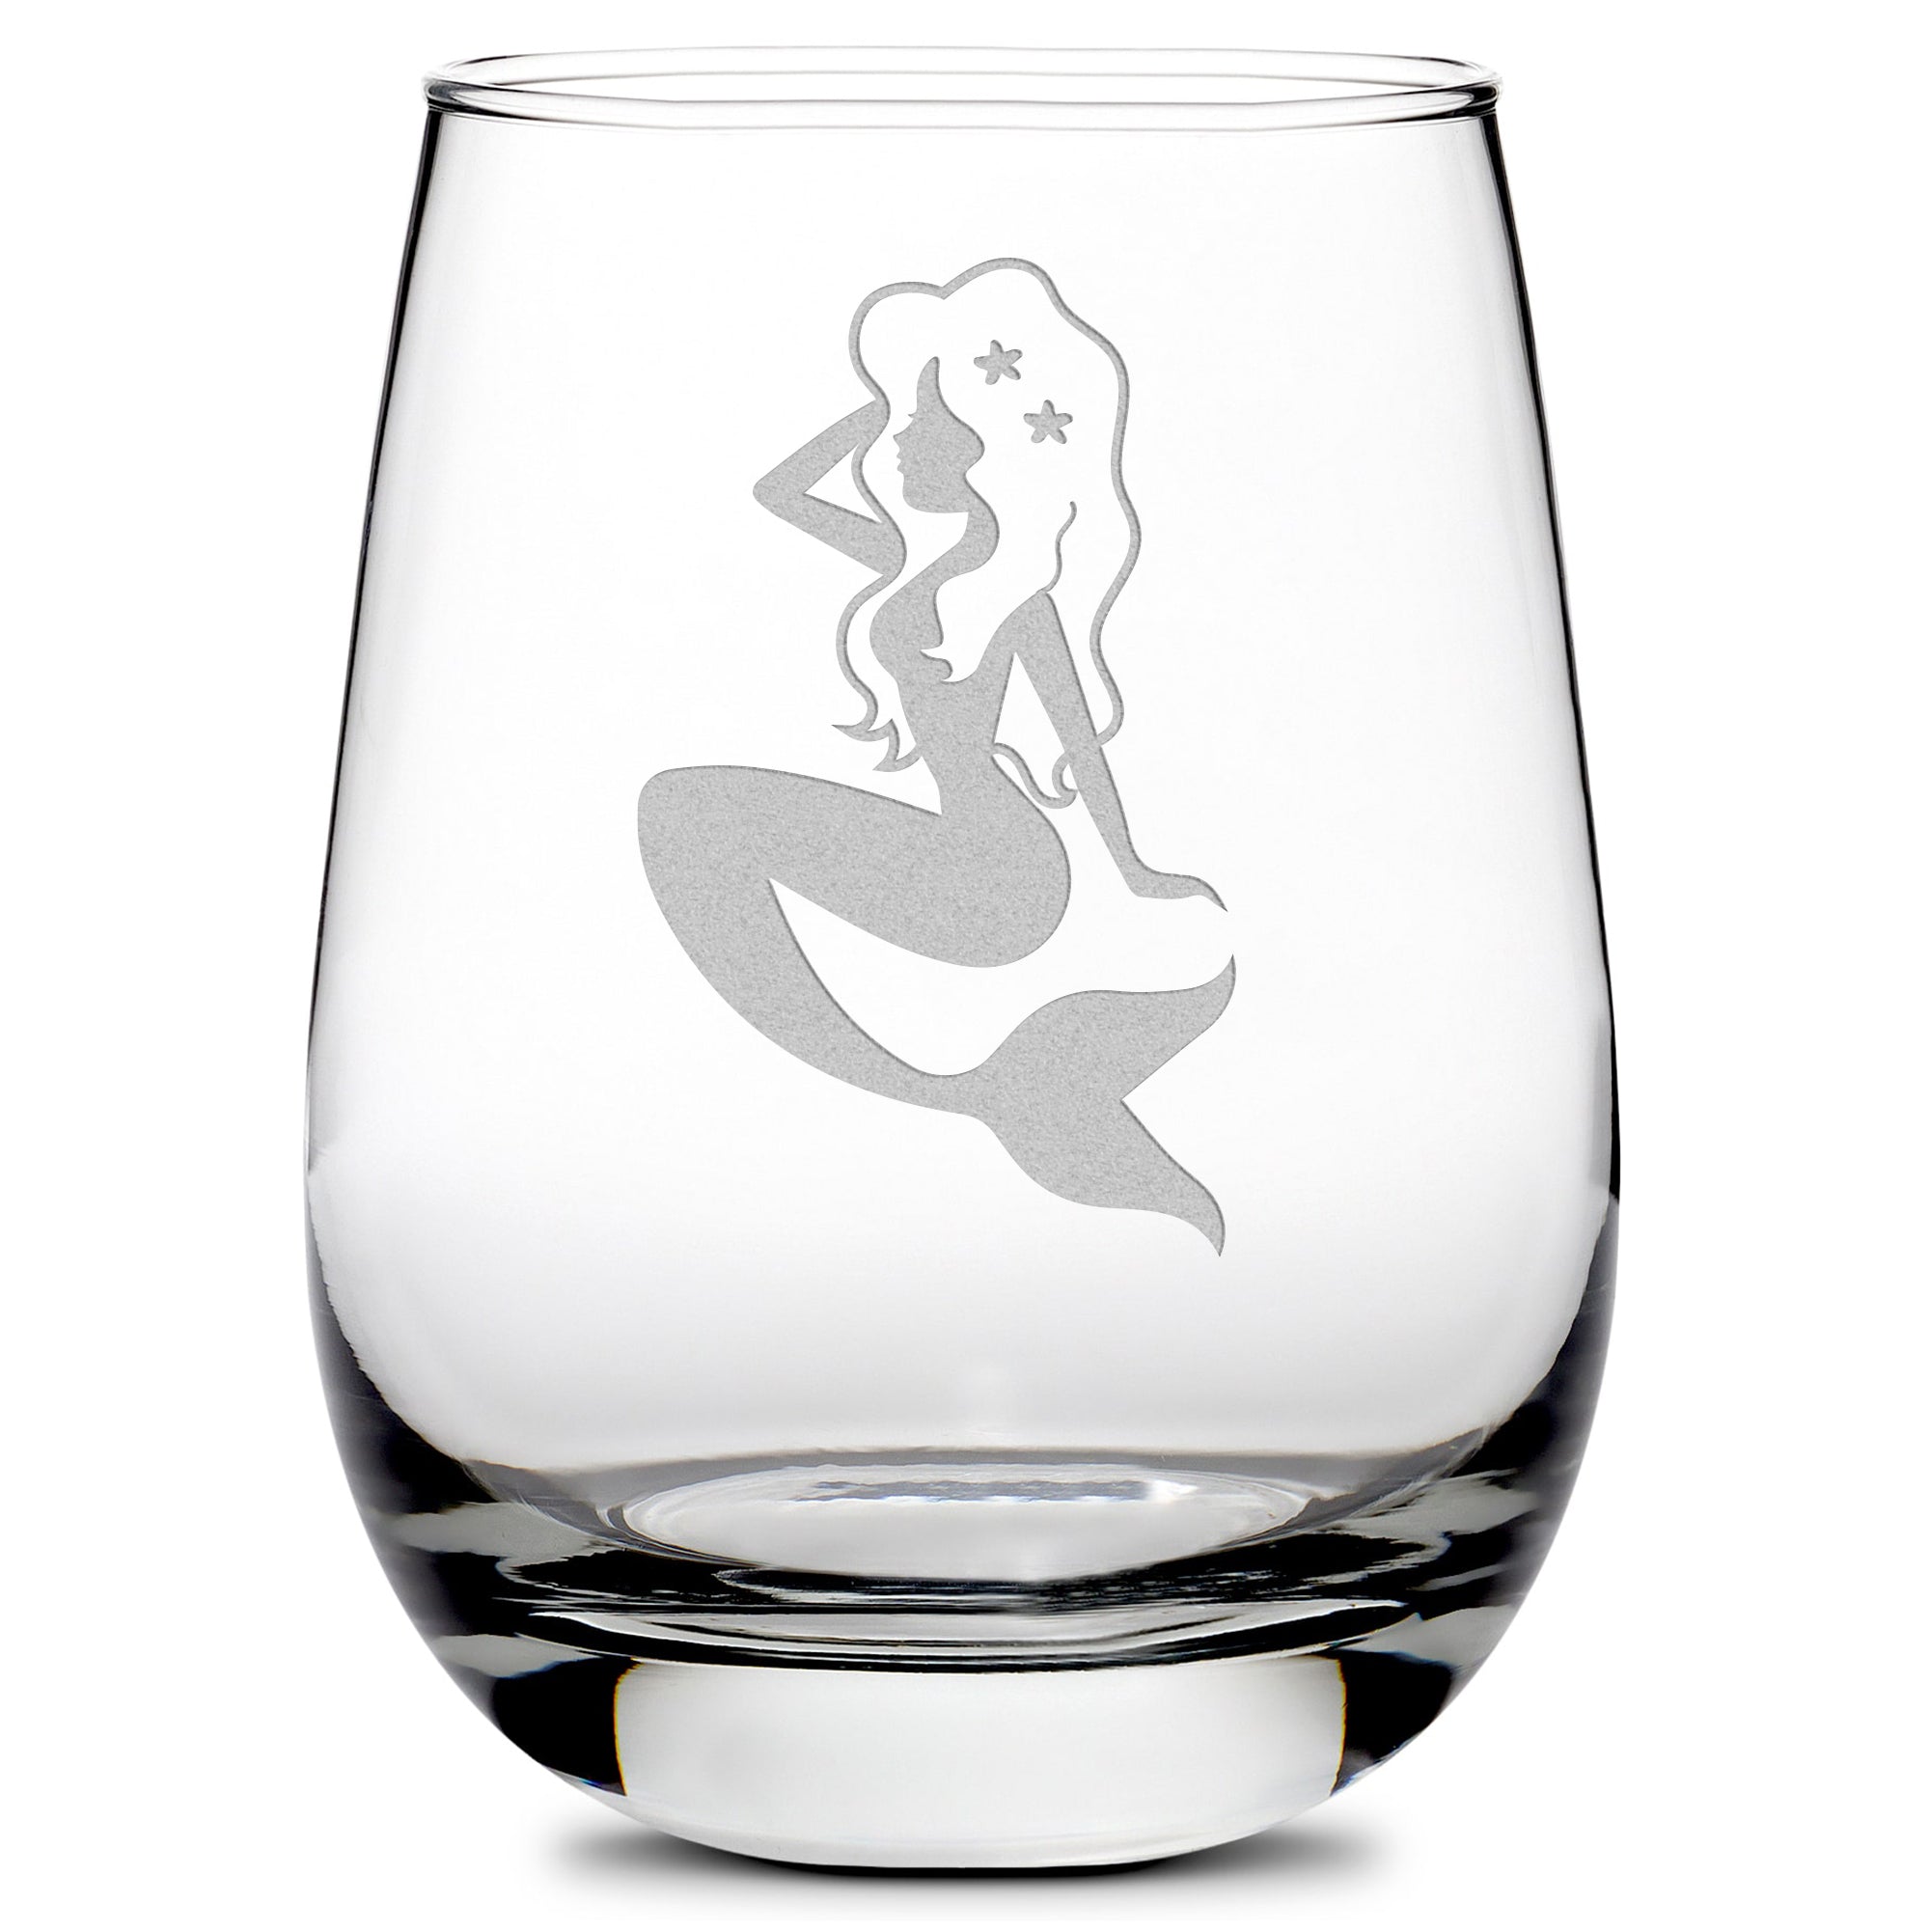 Premium Wine Glass, Mermaid Design, 16oz, Laser Etched or Hand Etched